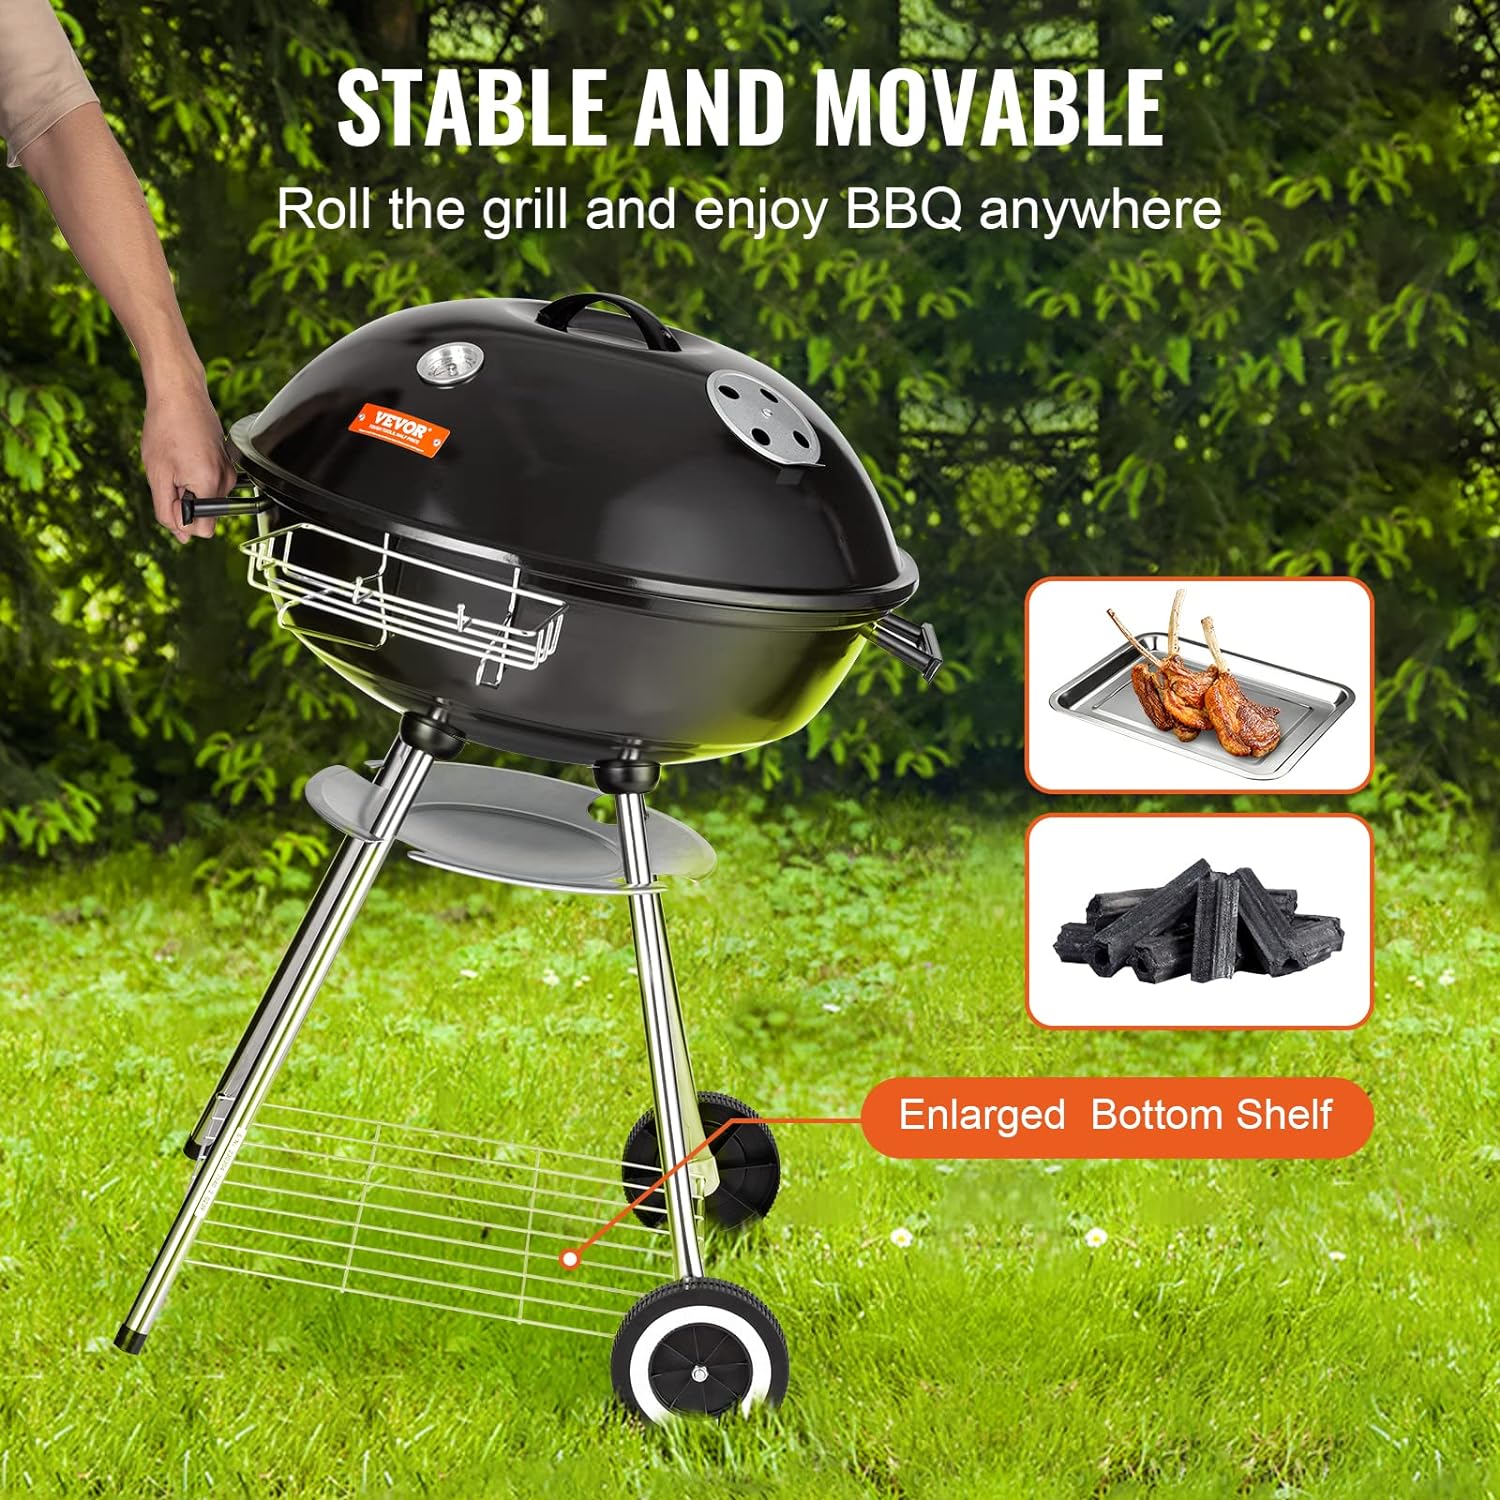 VEVOR 22 inch Charcoal Grill, Portable Charcoal Grill with Wheels for Outdoor, Porcelain-Enameled Lid and Ash Catcher  Thermometer, Round Barbecue Kettle Grill Bowl Wheels for Small Patio Backyard